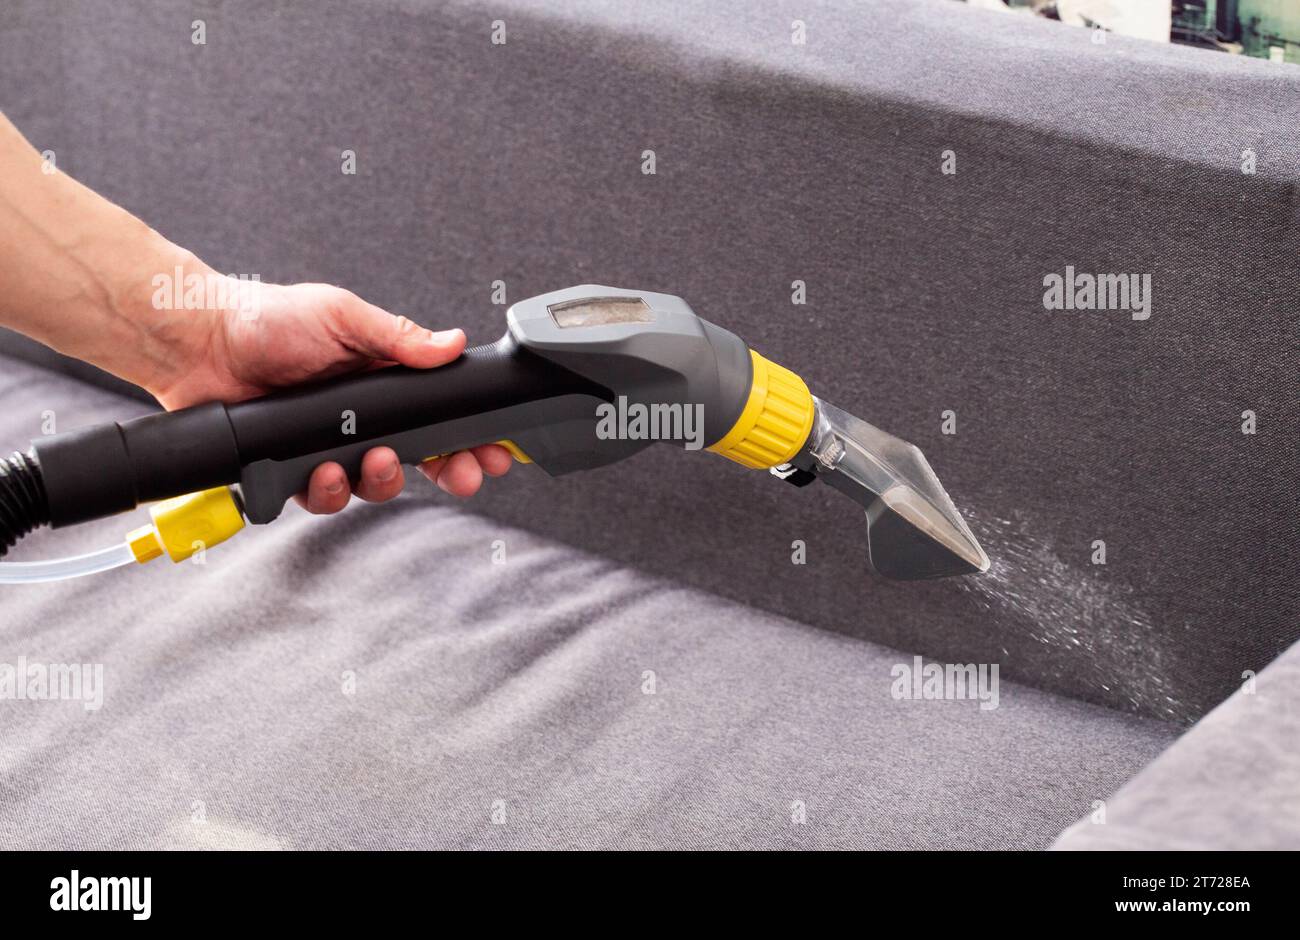 Applying a special cleaning solution to clean stains and dirt on upholstery of upholstered furniture. The first stage of dry cleaning. Stock Photo